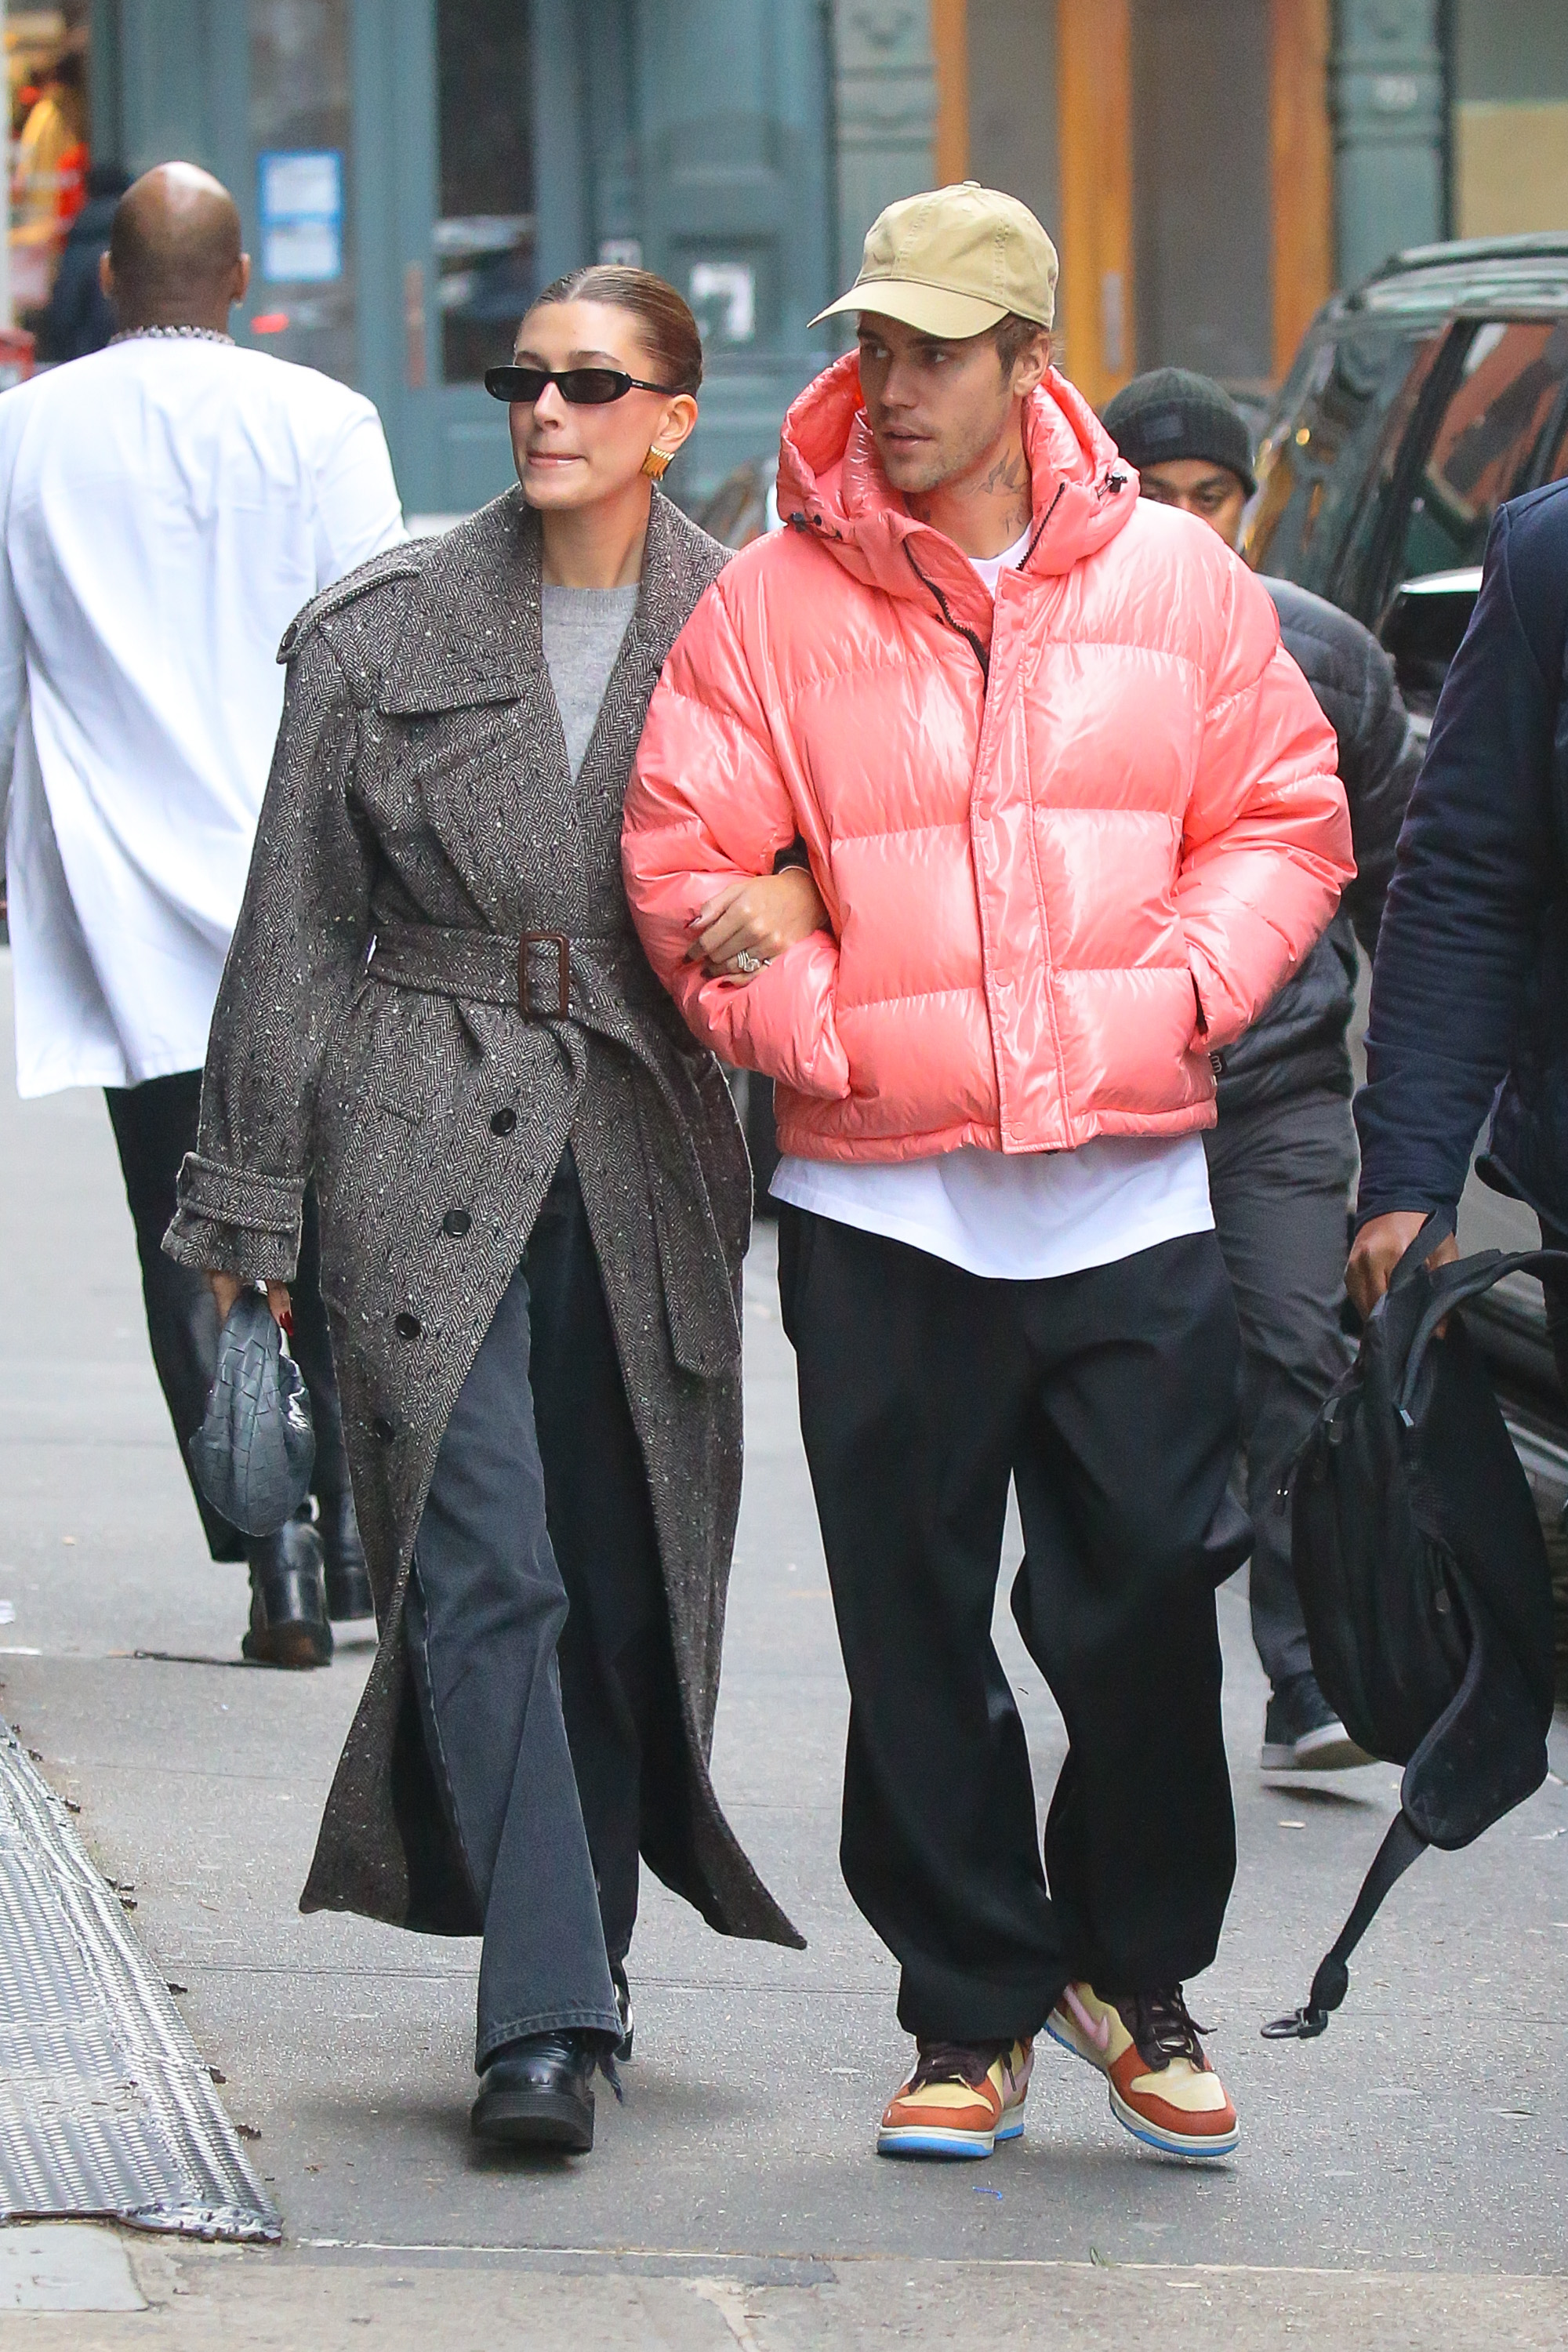 Justin And Hailey Bieber Have Back-To-Back NYC Couple Street Style